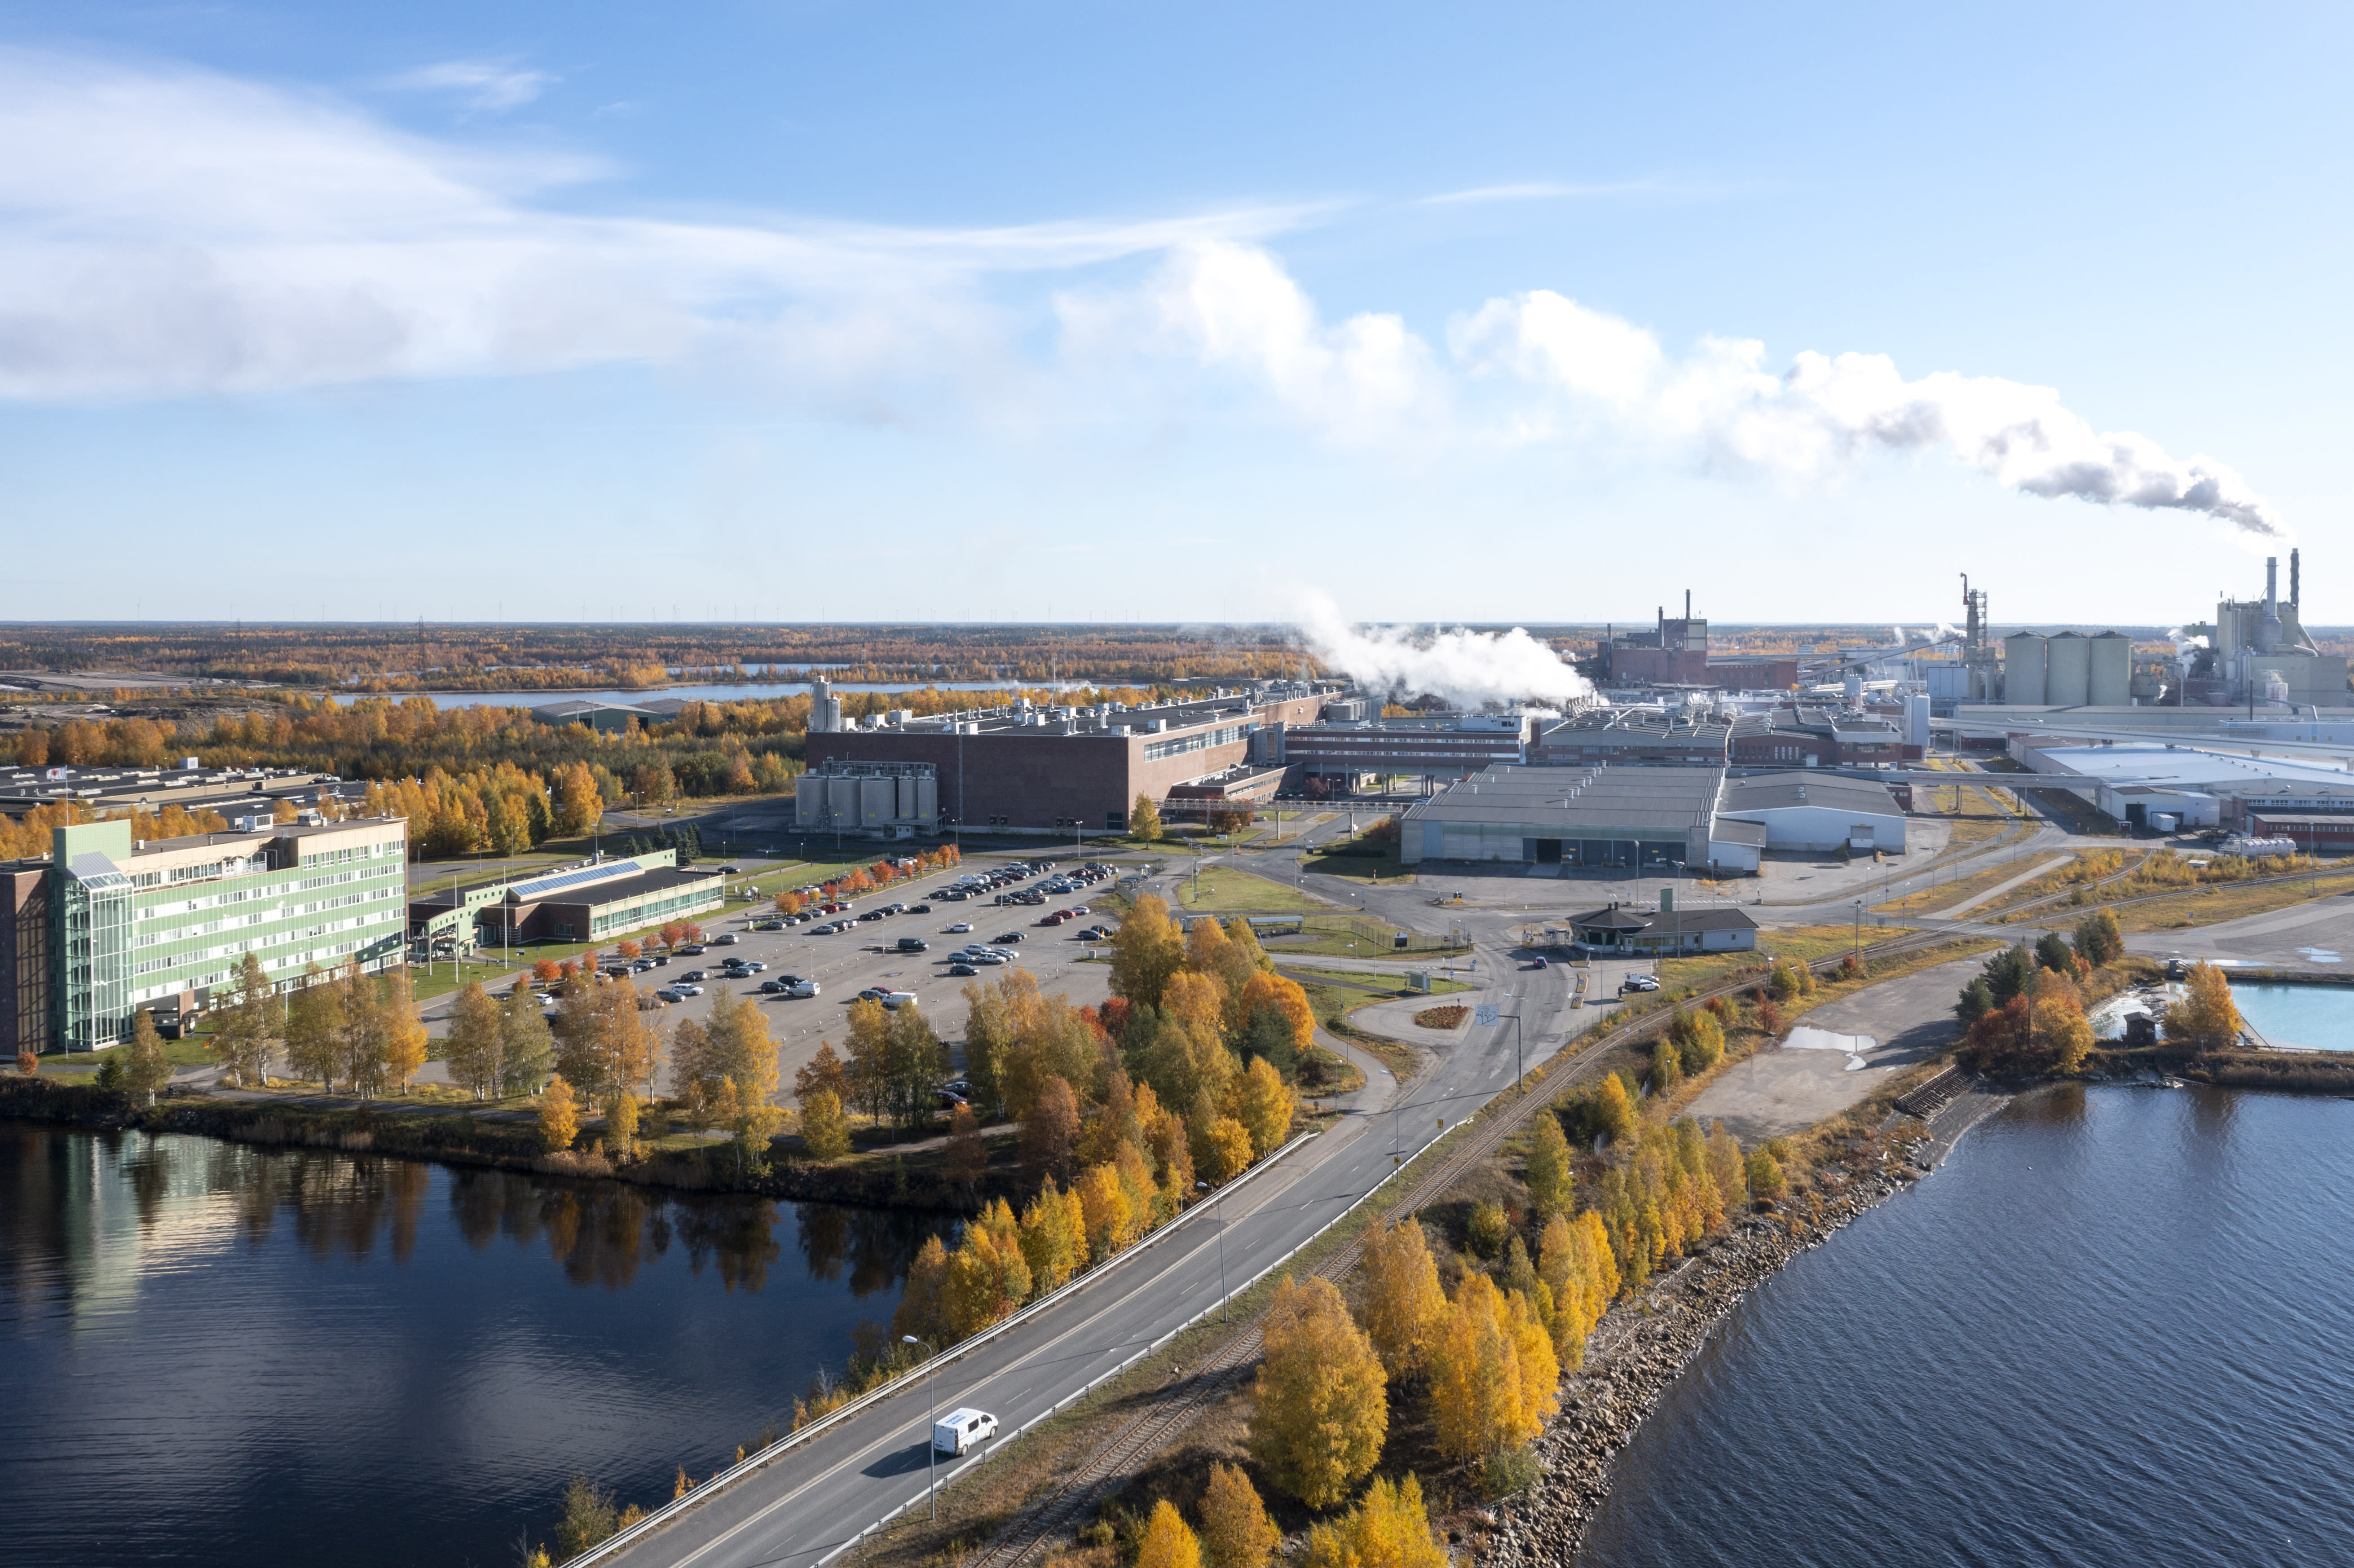 Textile recycling plant from the Lapland paper mill